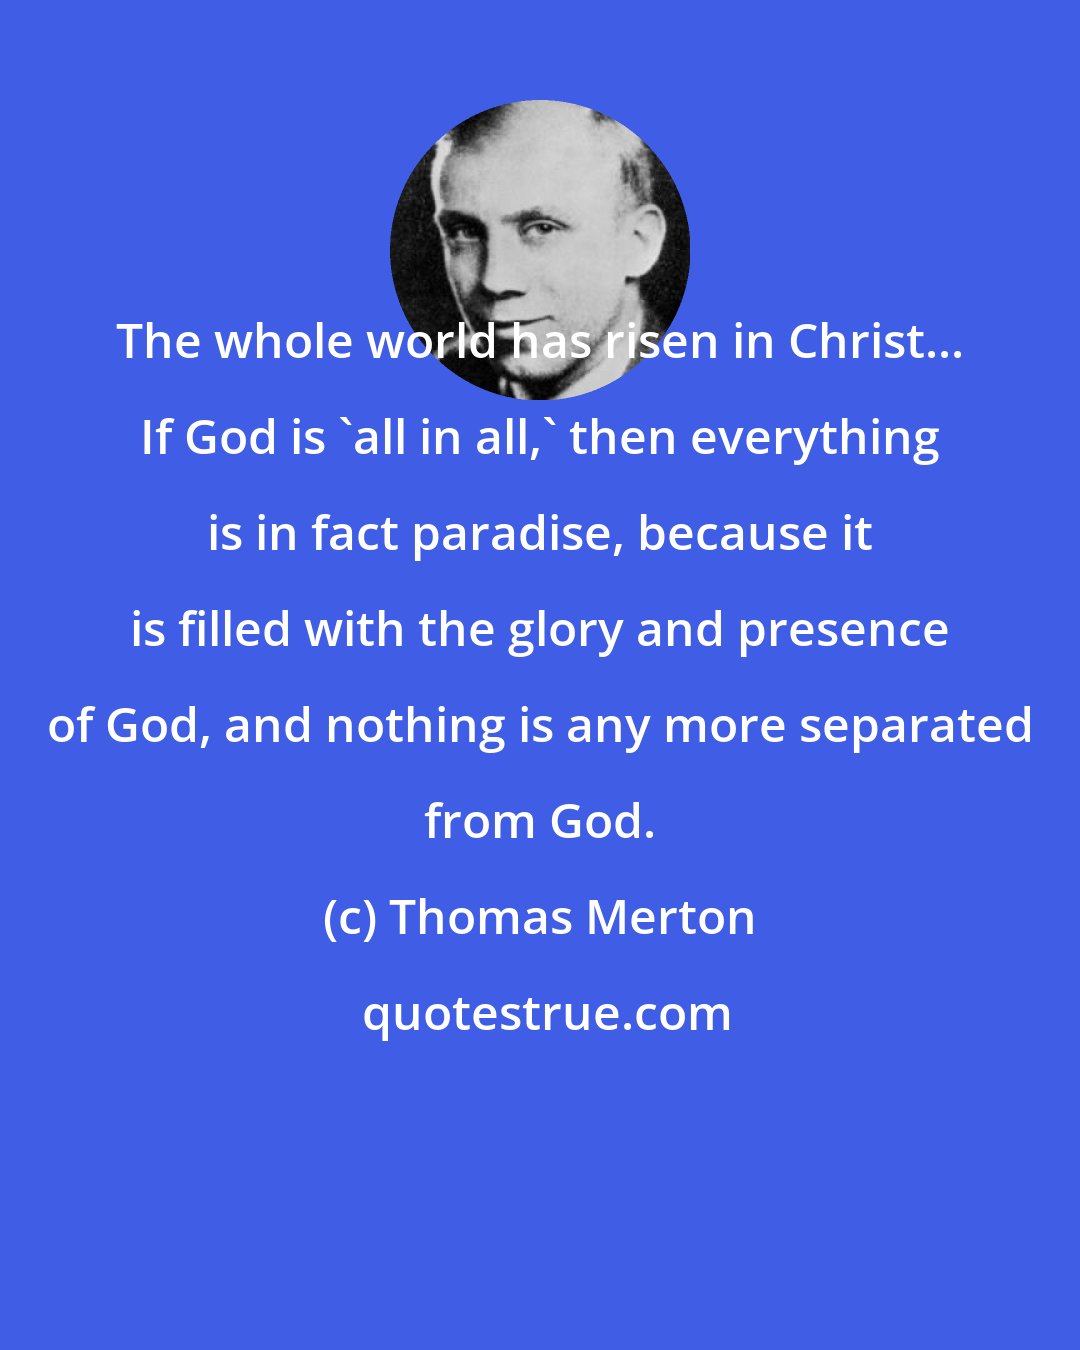 Thomas Merton: The whole world has risen in Christ... If God is 'all in all,' then everything is in fact paradise, because it is filled with the glory and presence of God, and nothing is any more separated from God.